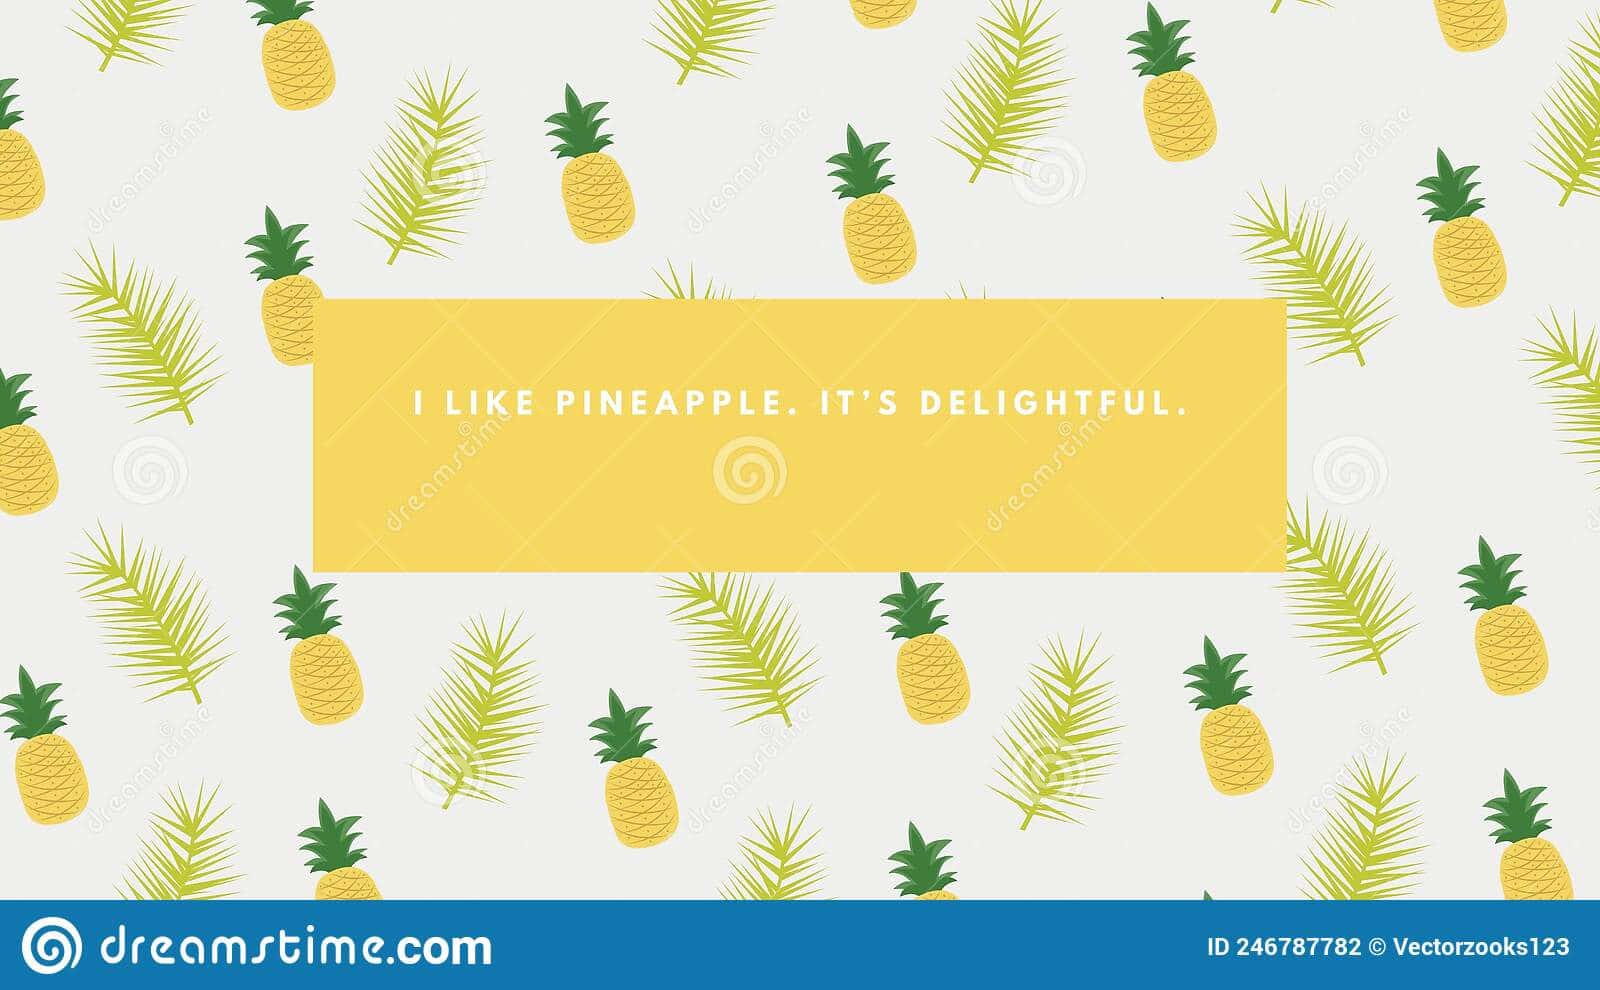 Brighten your day with a tropical pineapples on your desktop wallpaper Wallpaper